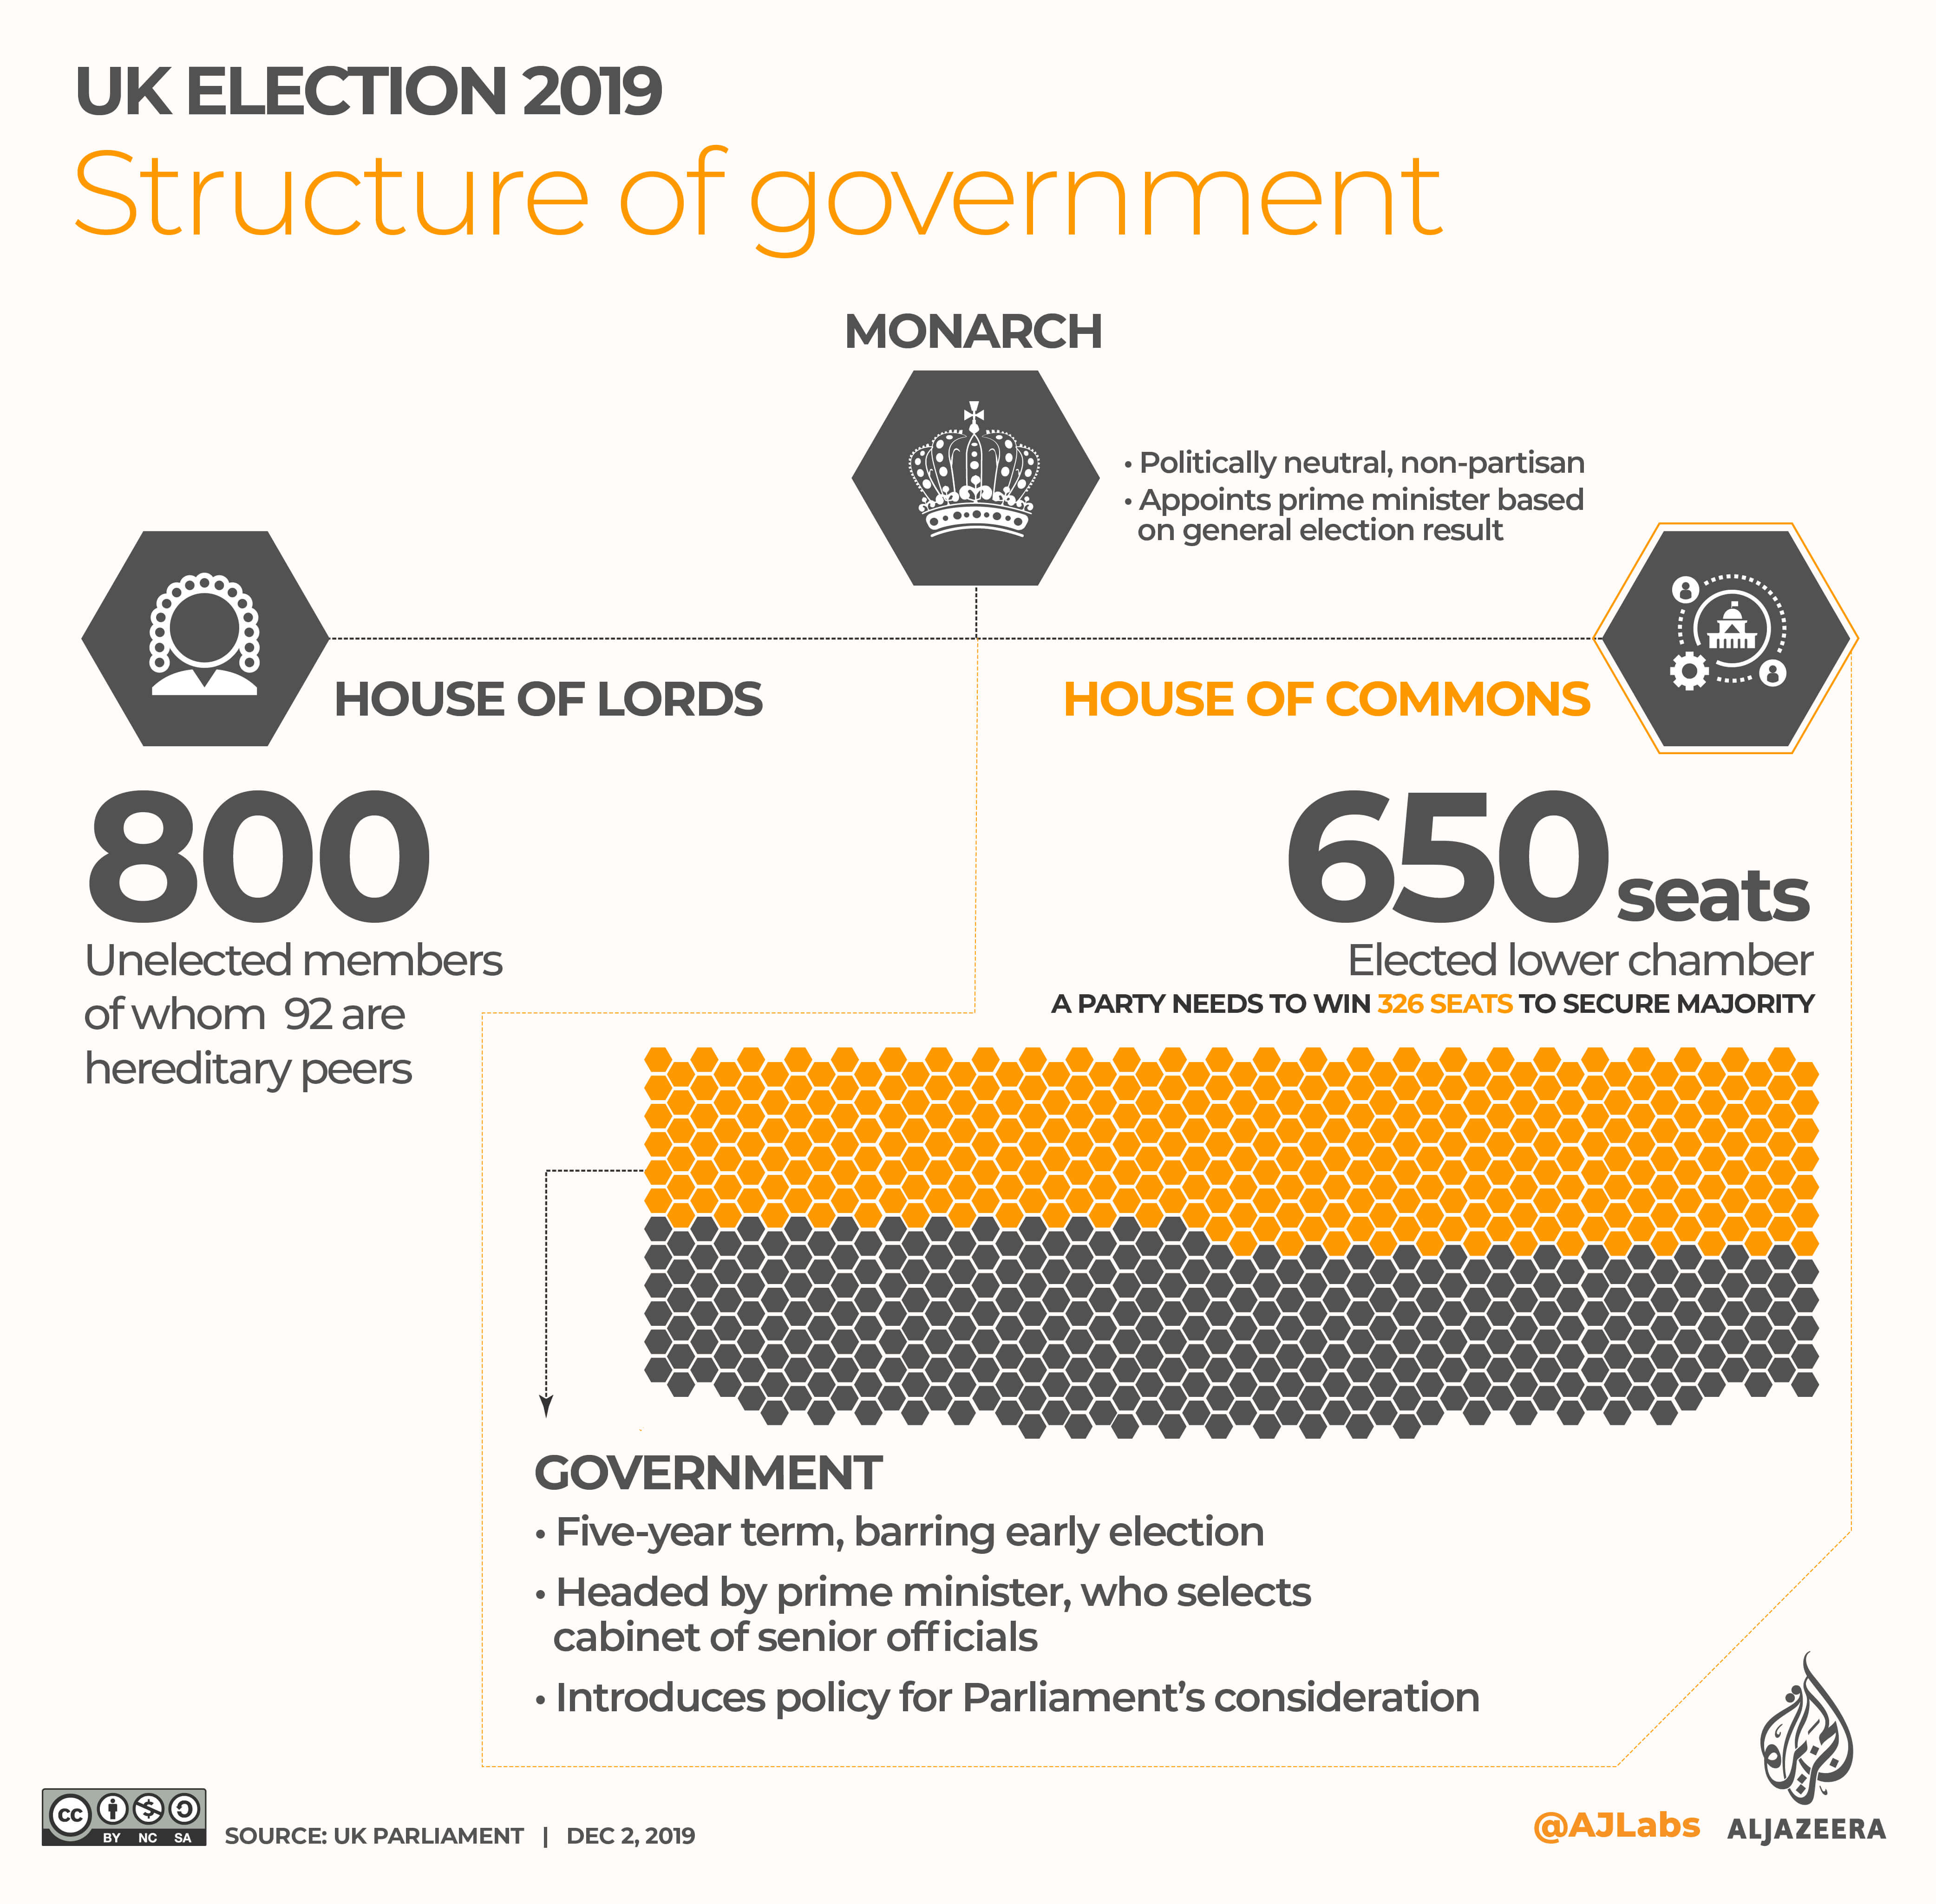 INTERACTIVE: UK election 2019 - Structure of government